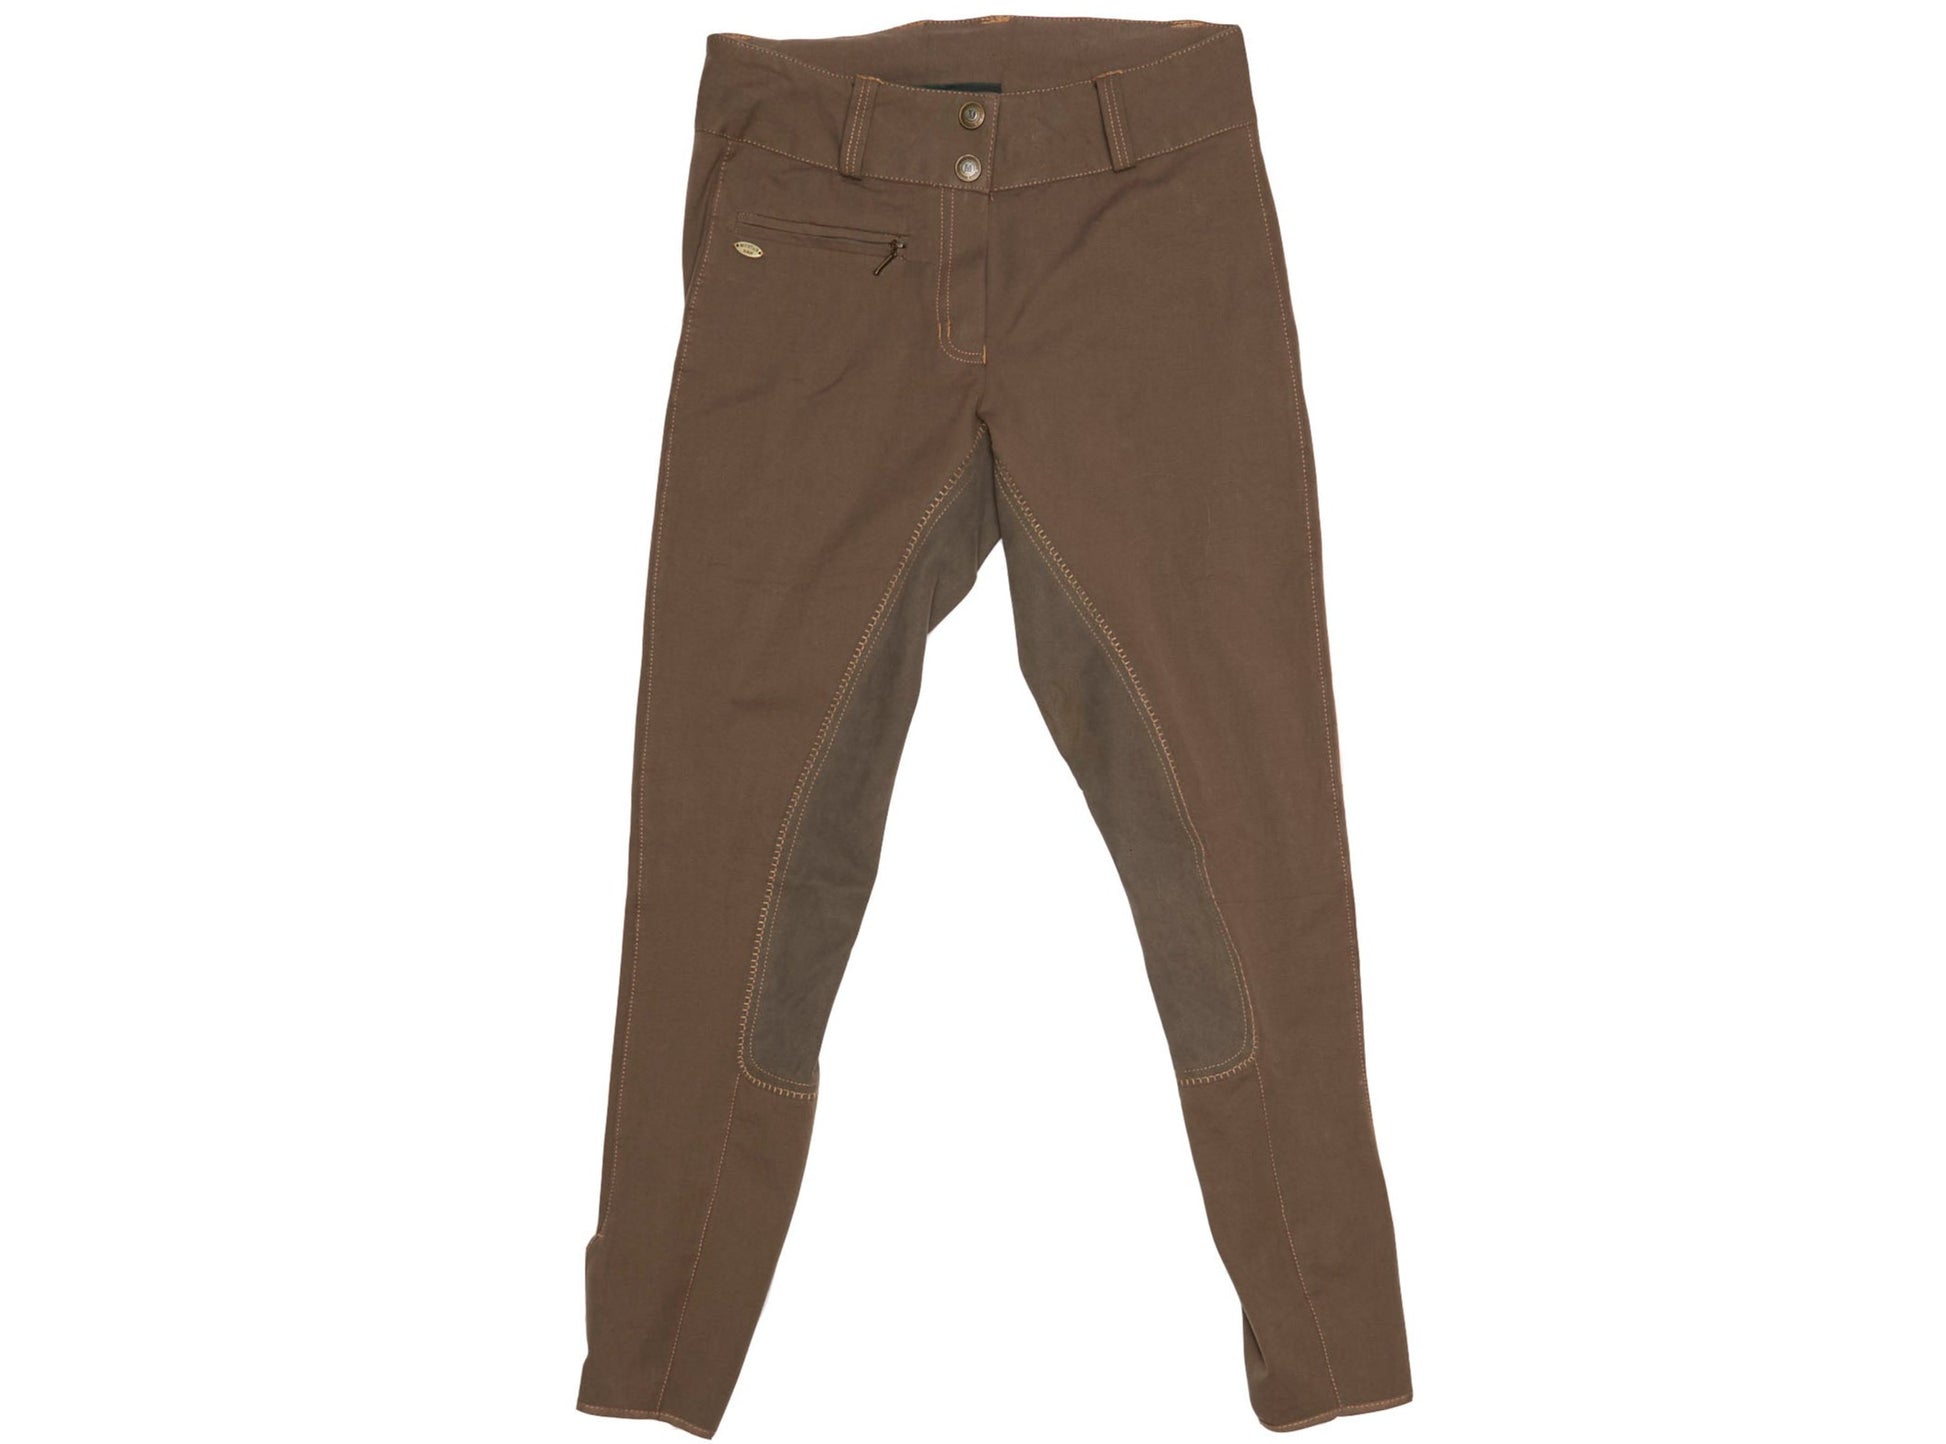 Womens Mountain Horse Trousers - W28" L29"